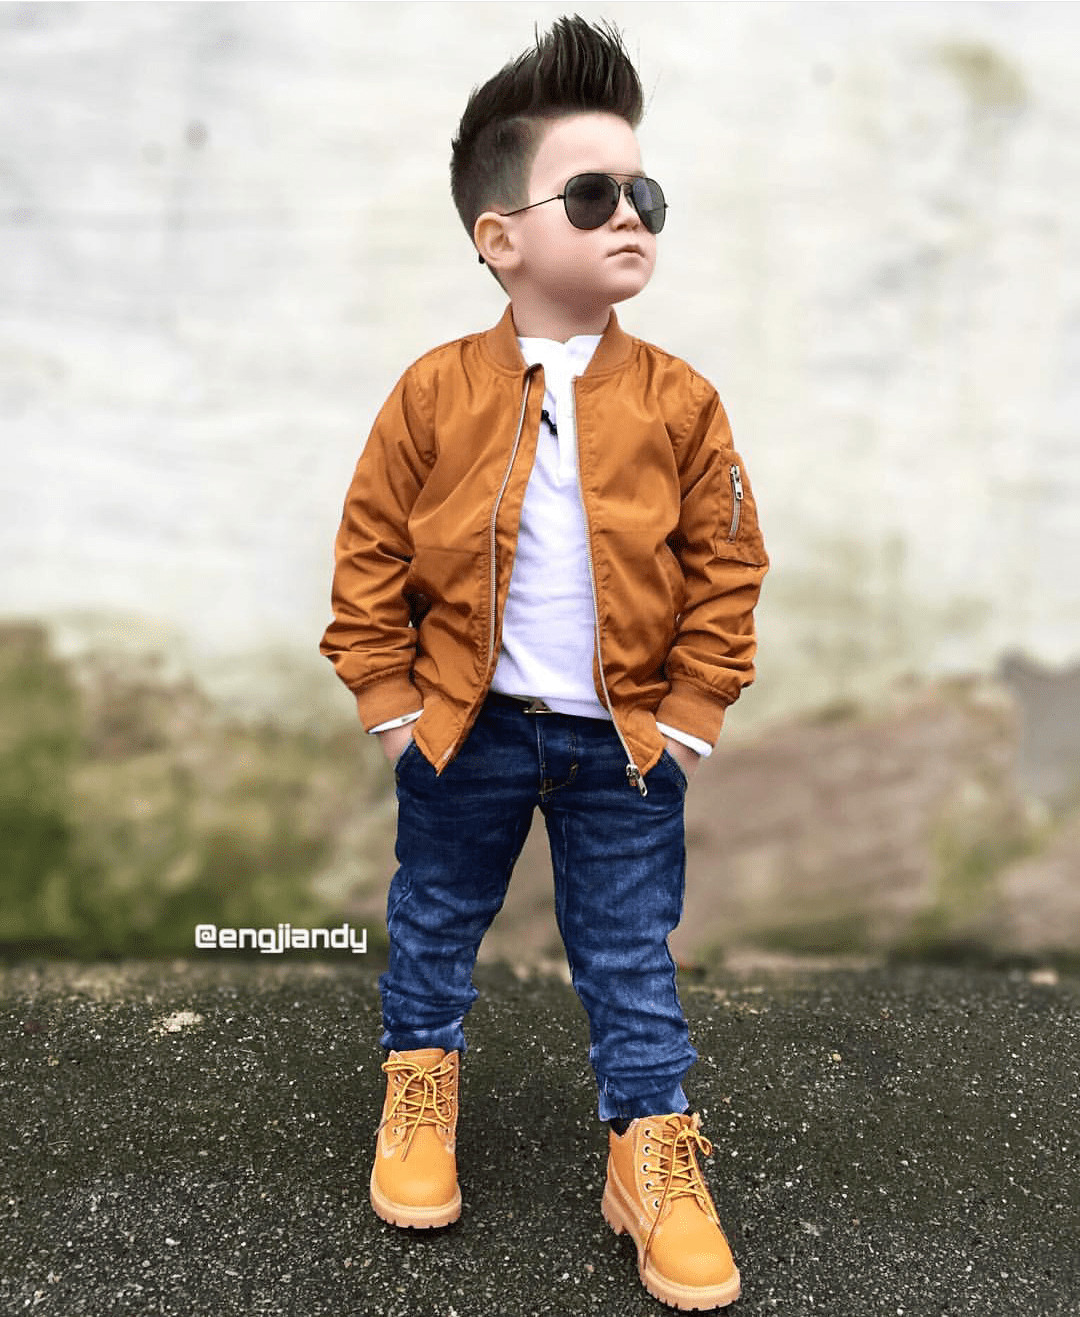 80'S Fashion For Kids Boys
 This Month s Best Street Style Looks of boy Kids Fashion